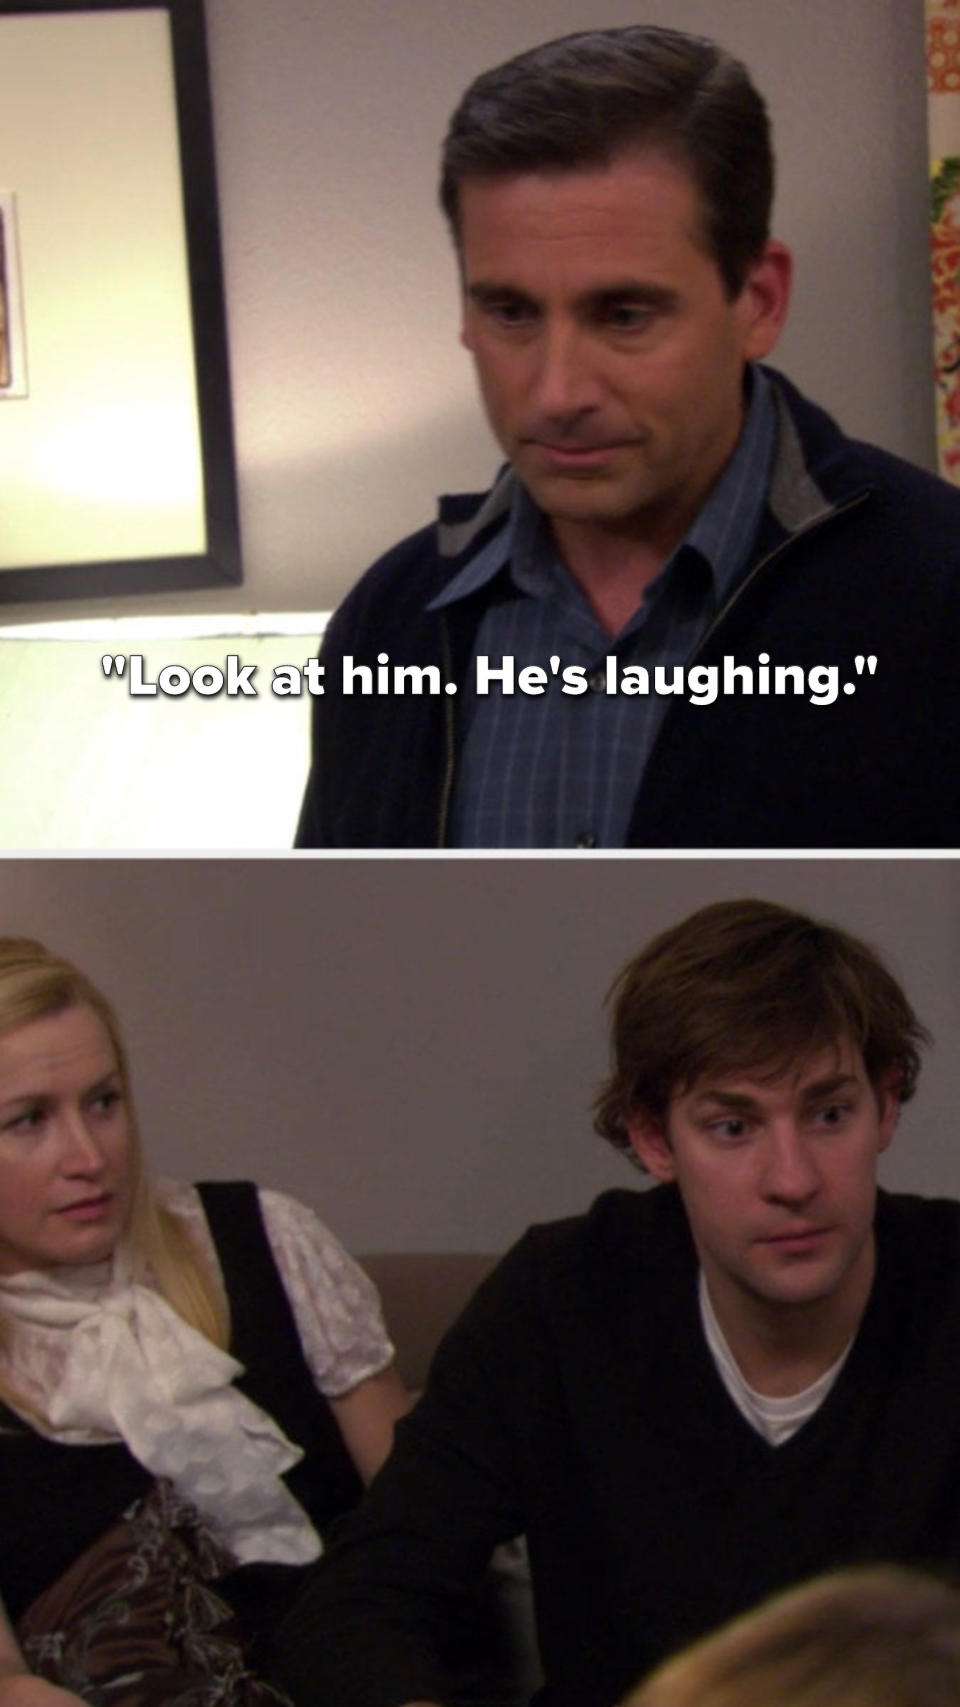 Michael says, "Look at him, he's laughing" and Jim has a completely straight face